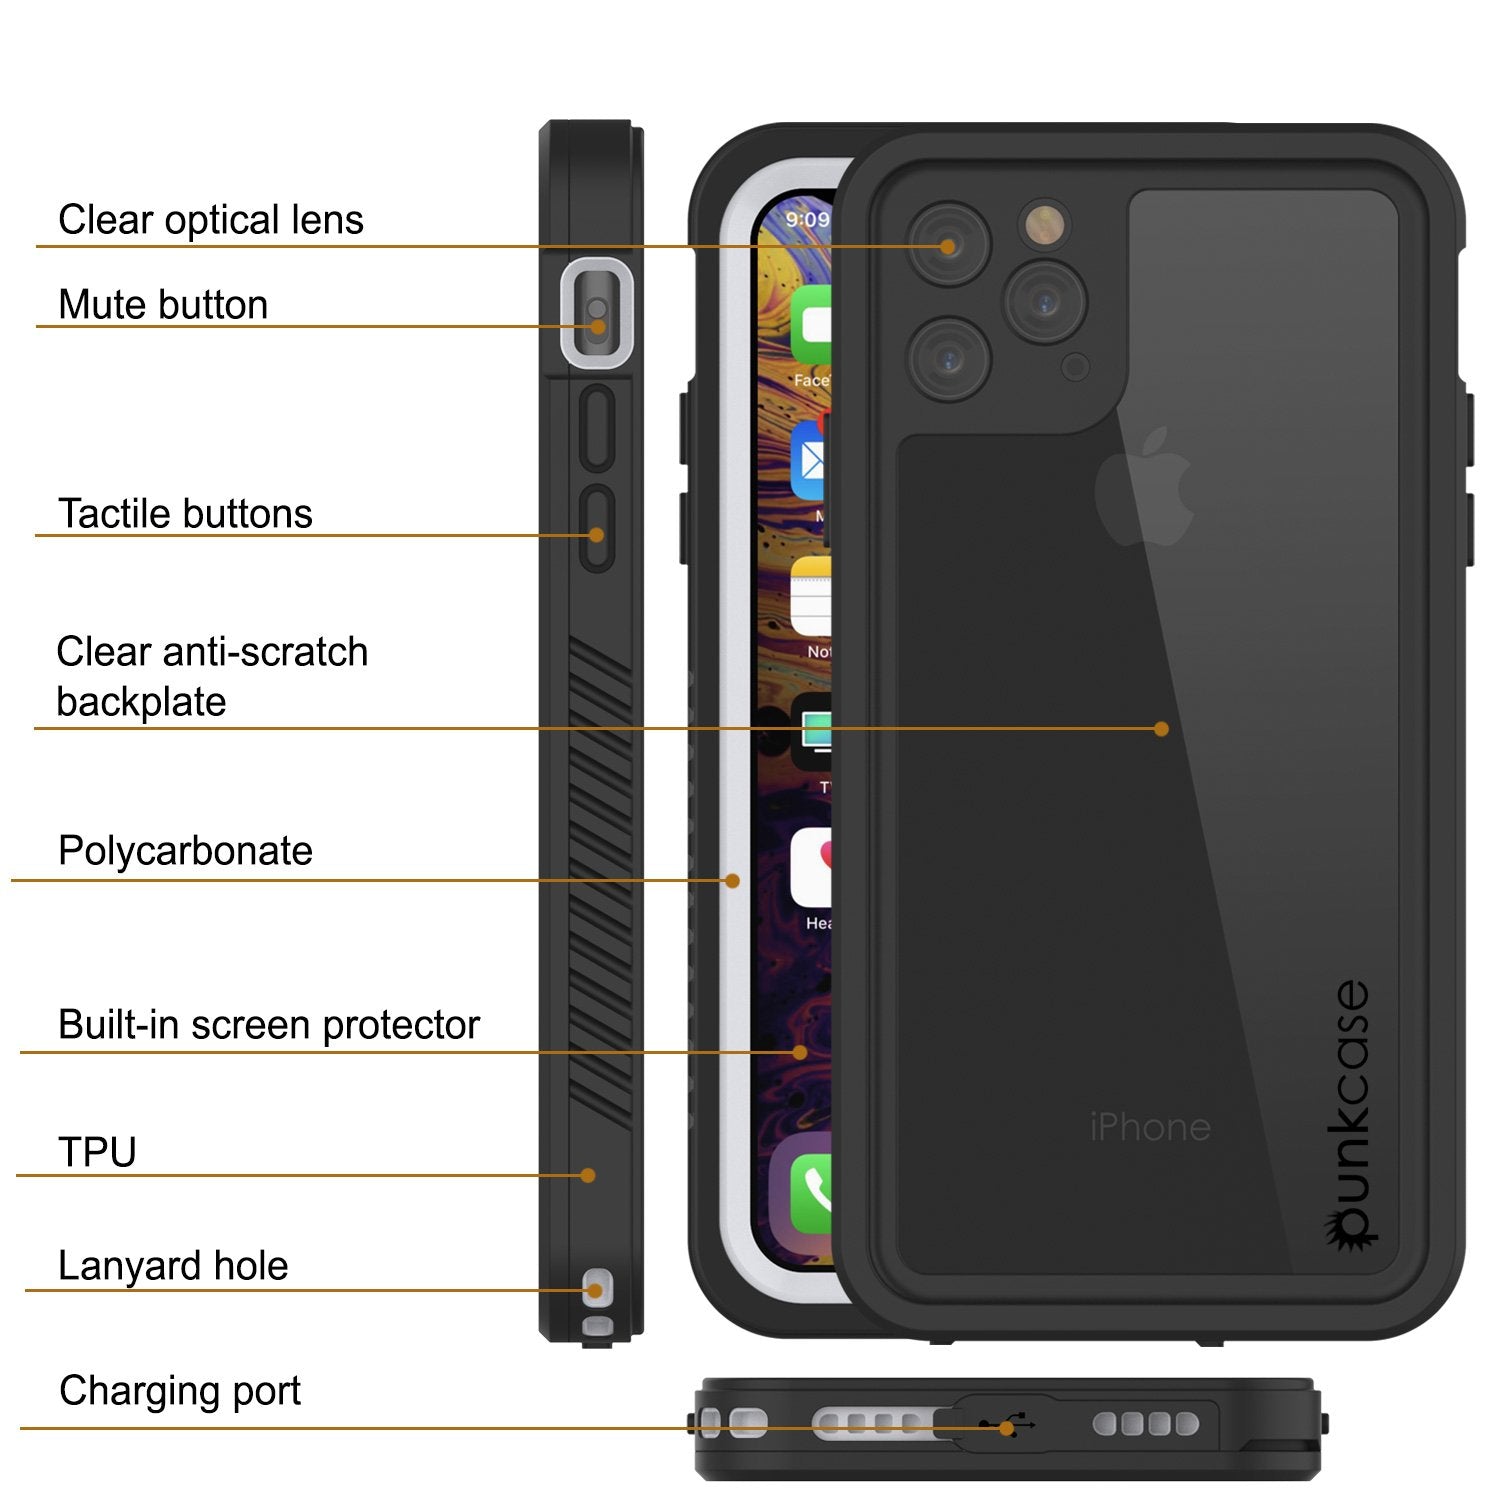 iPhone 11 Pro Max Waterproof Case, Punkcase [Extreme Series] Armor Cover W/ Built In Screen Protector [White]